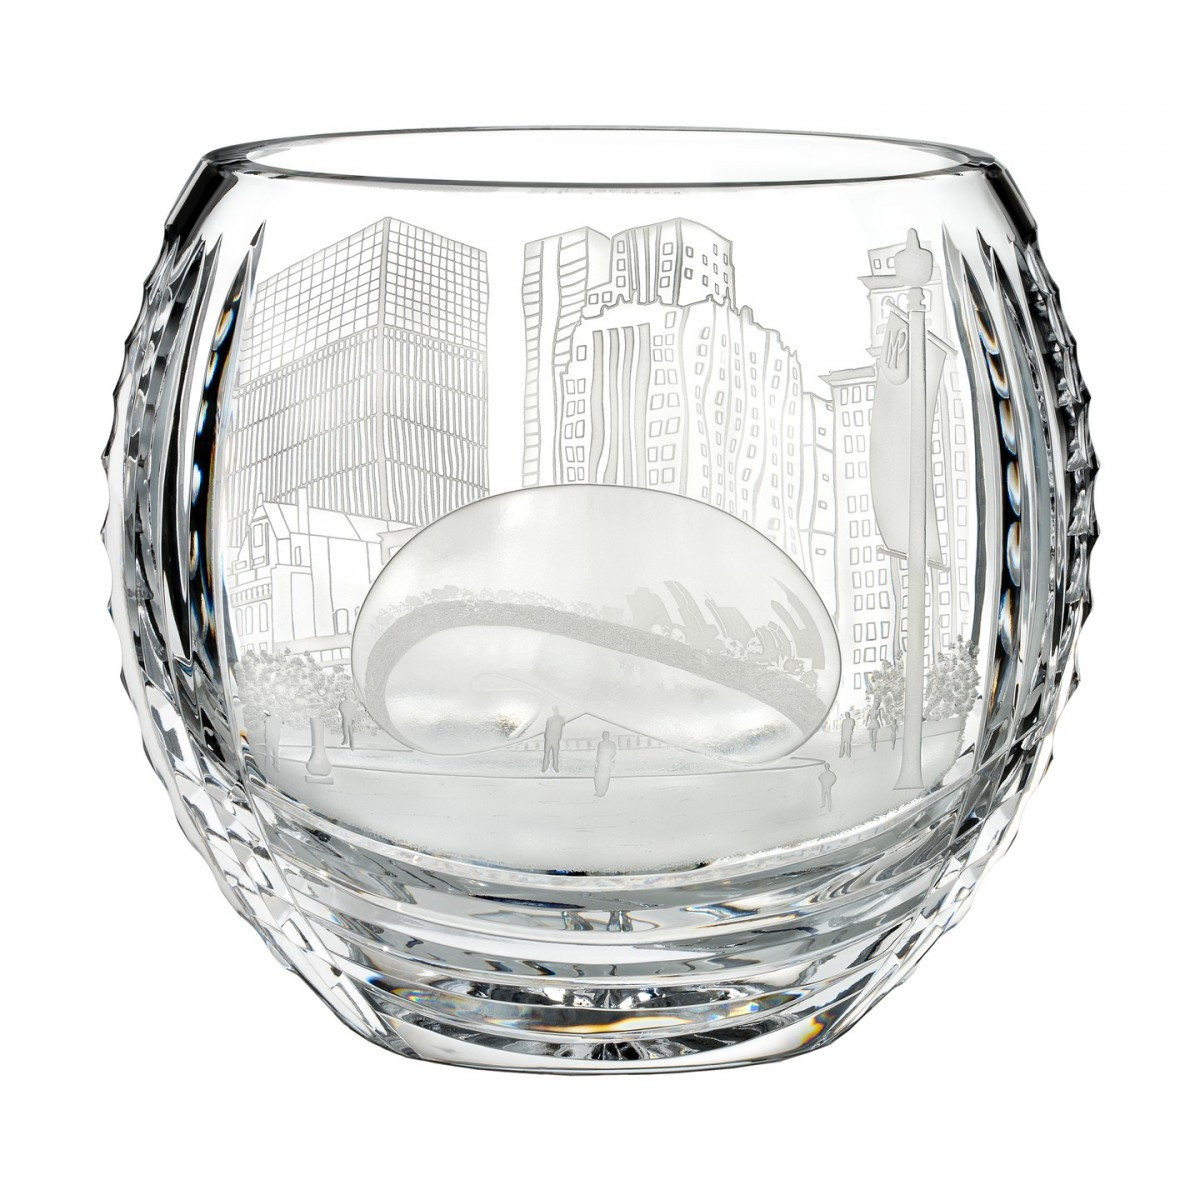 22 Stylish Waterford Maritana Vase 2024 free download waterford maritana vase of america the beautiful chicago 9 3in bowl house of waterford inside america the beautiful chicago 9 3in bowl